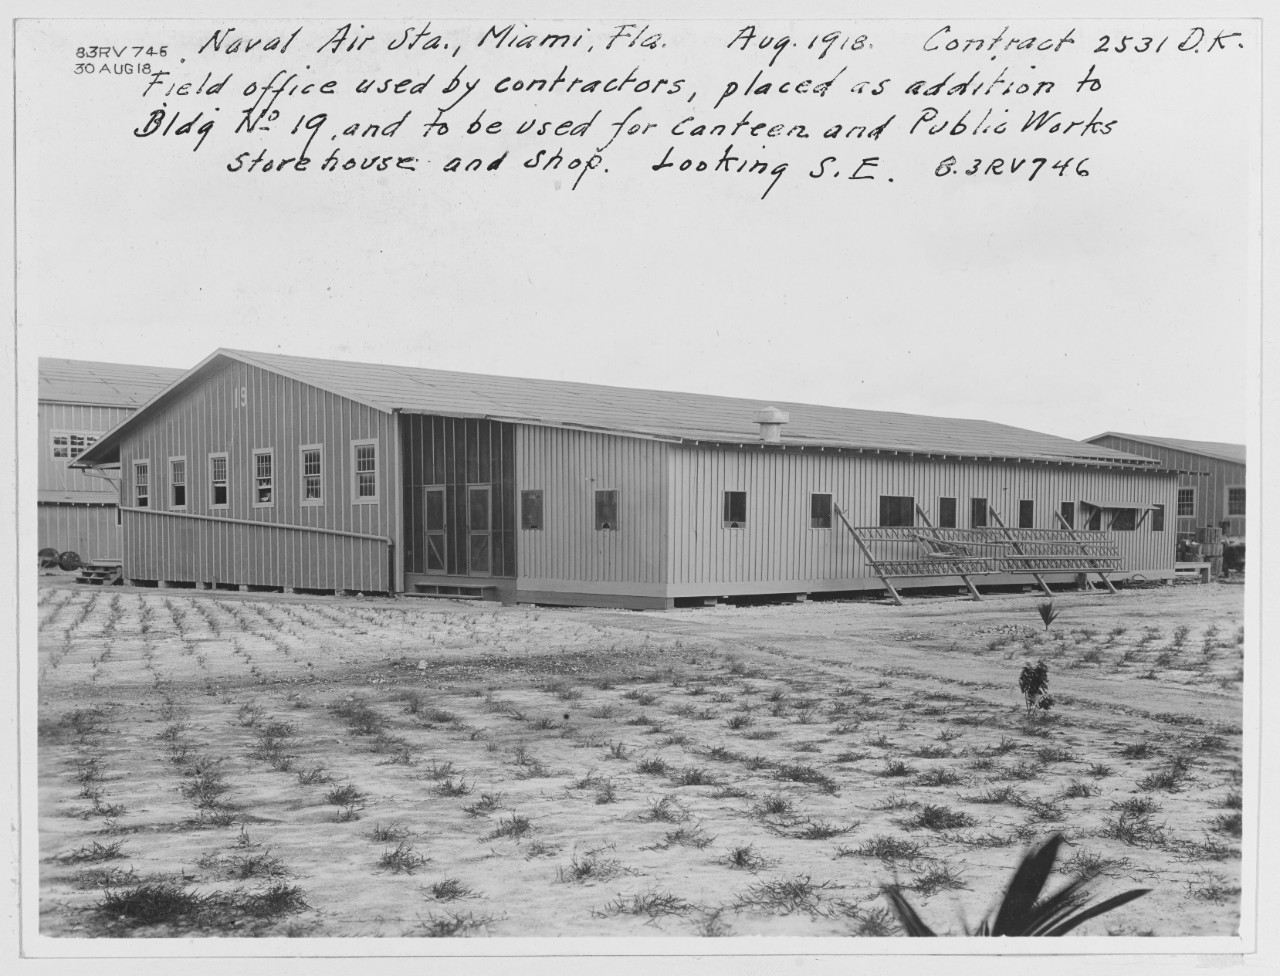 Field office used by contractors. Naval Air Station Miami, Florida.